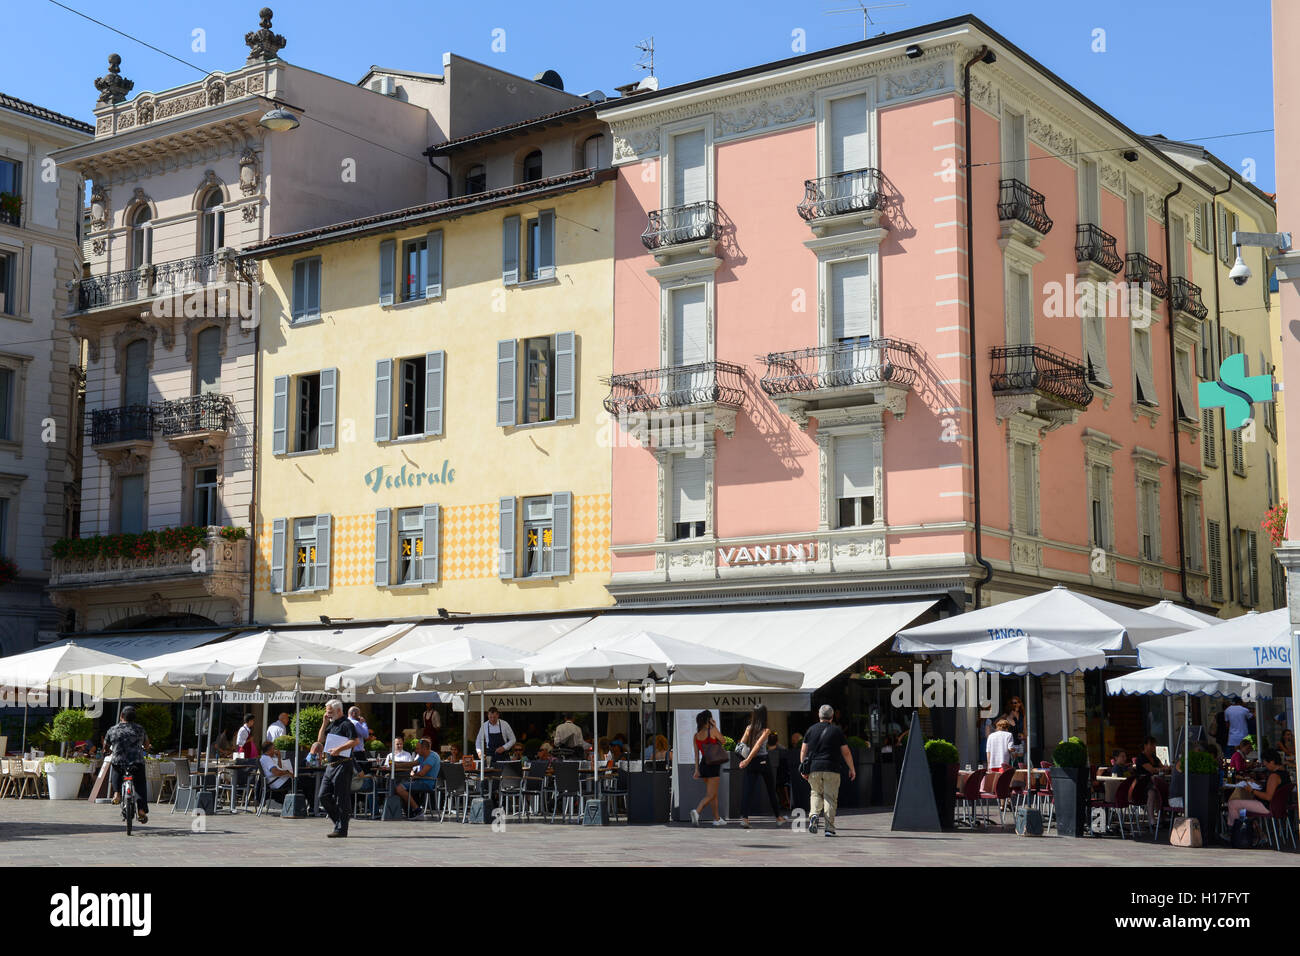 Lugano, Switzerland - 25 august 2016: people eating and drinking at the restaurants in the central square of Lugano on Switzerla Stock Photo